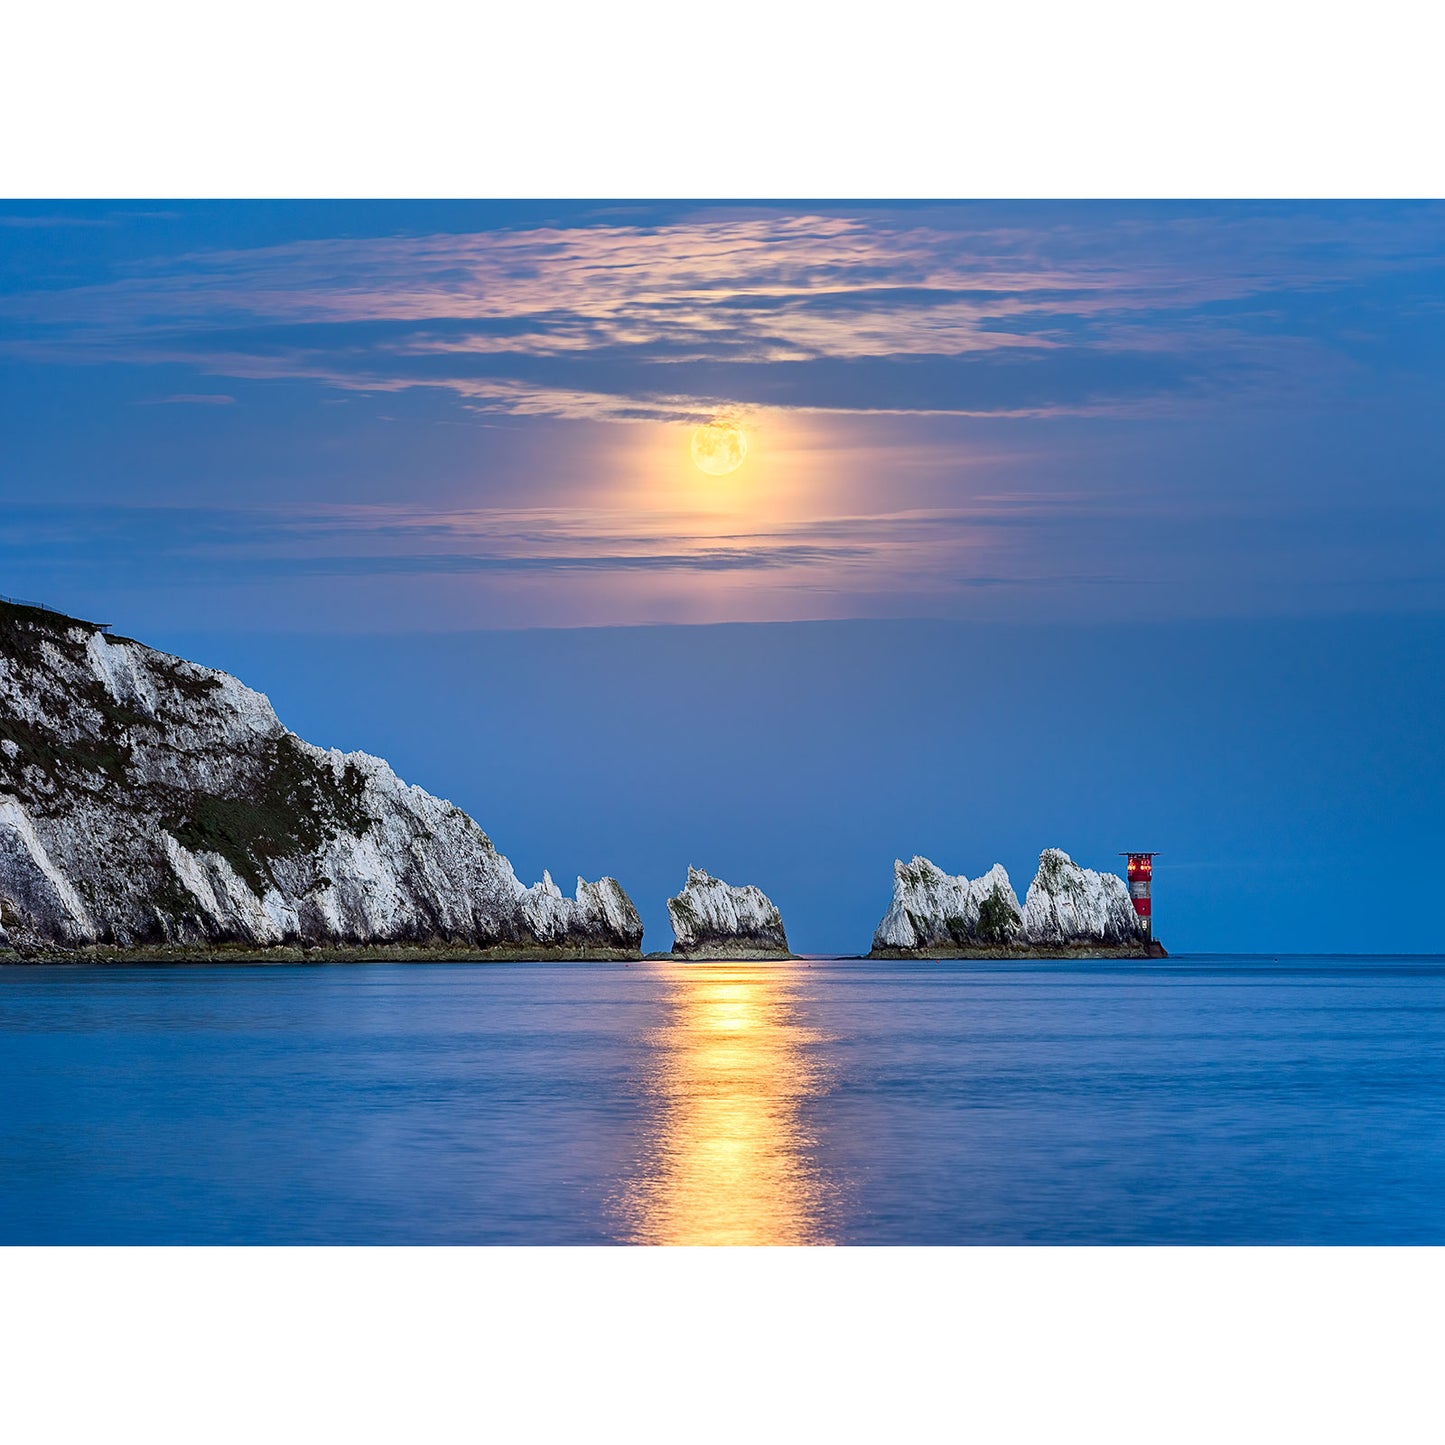 A Moonset over The Needles rises above a calm sea, casting a golden reflection on the water, with a lighthouse and white cliffs on the Isle of Wight captured by Available Light Photography.